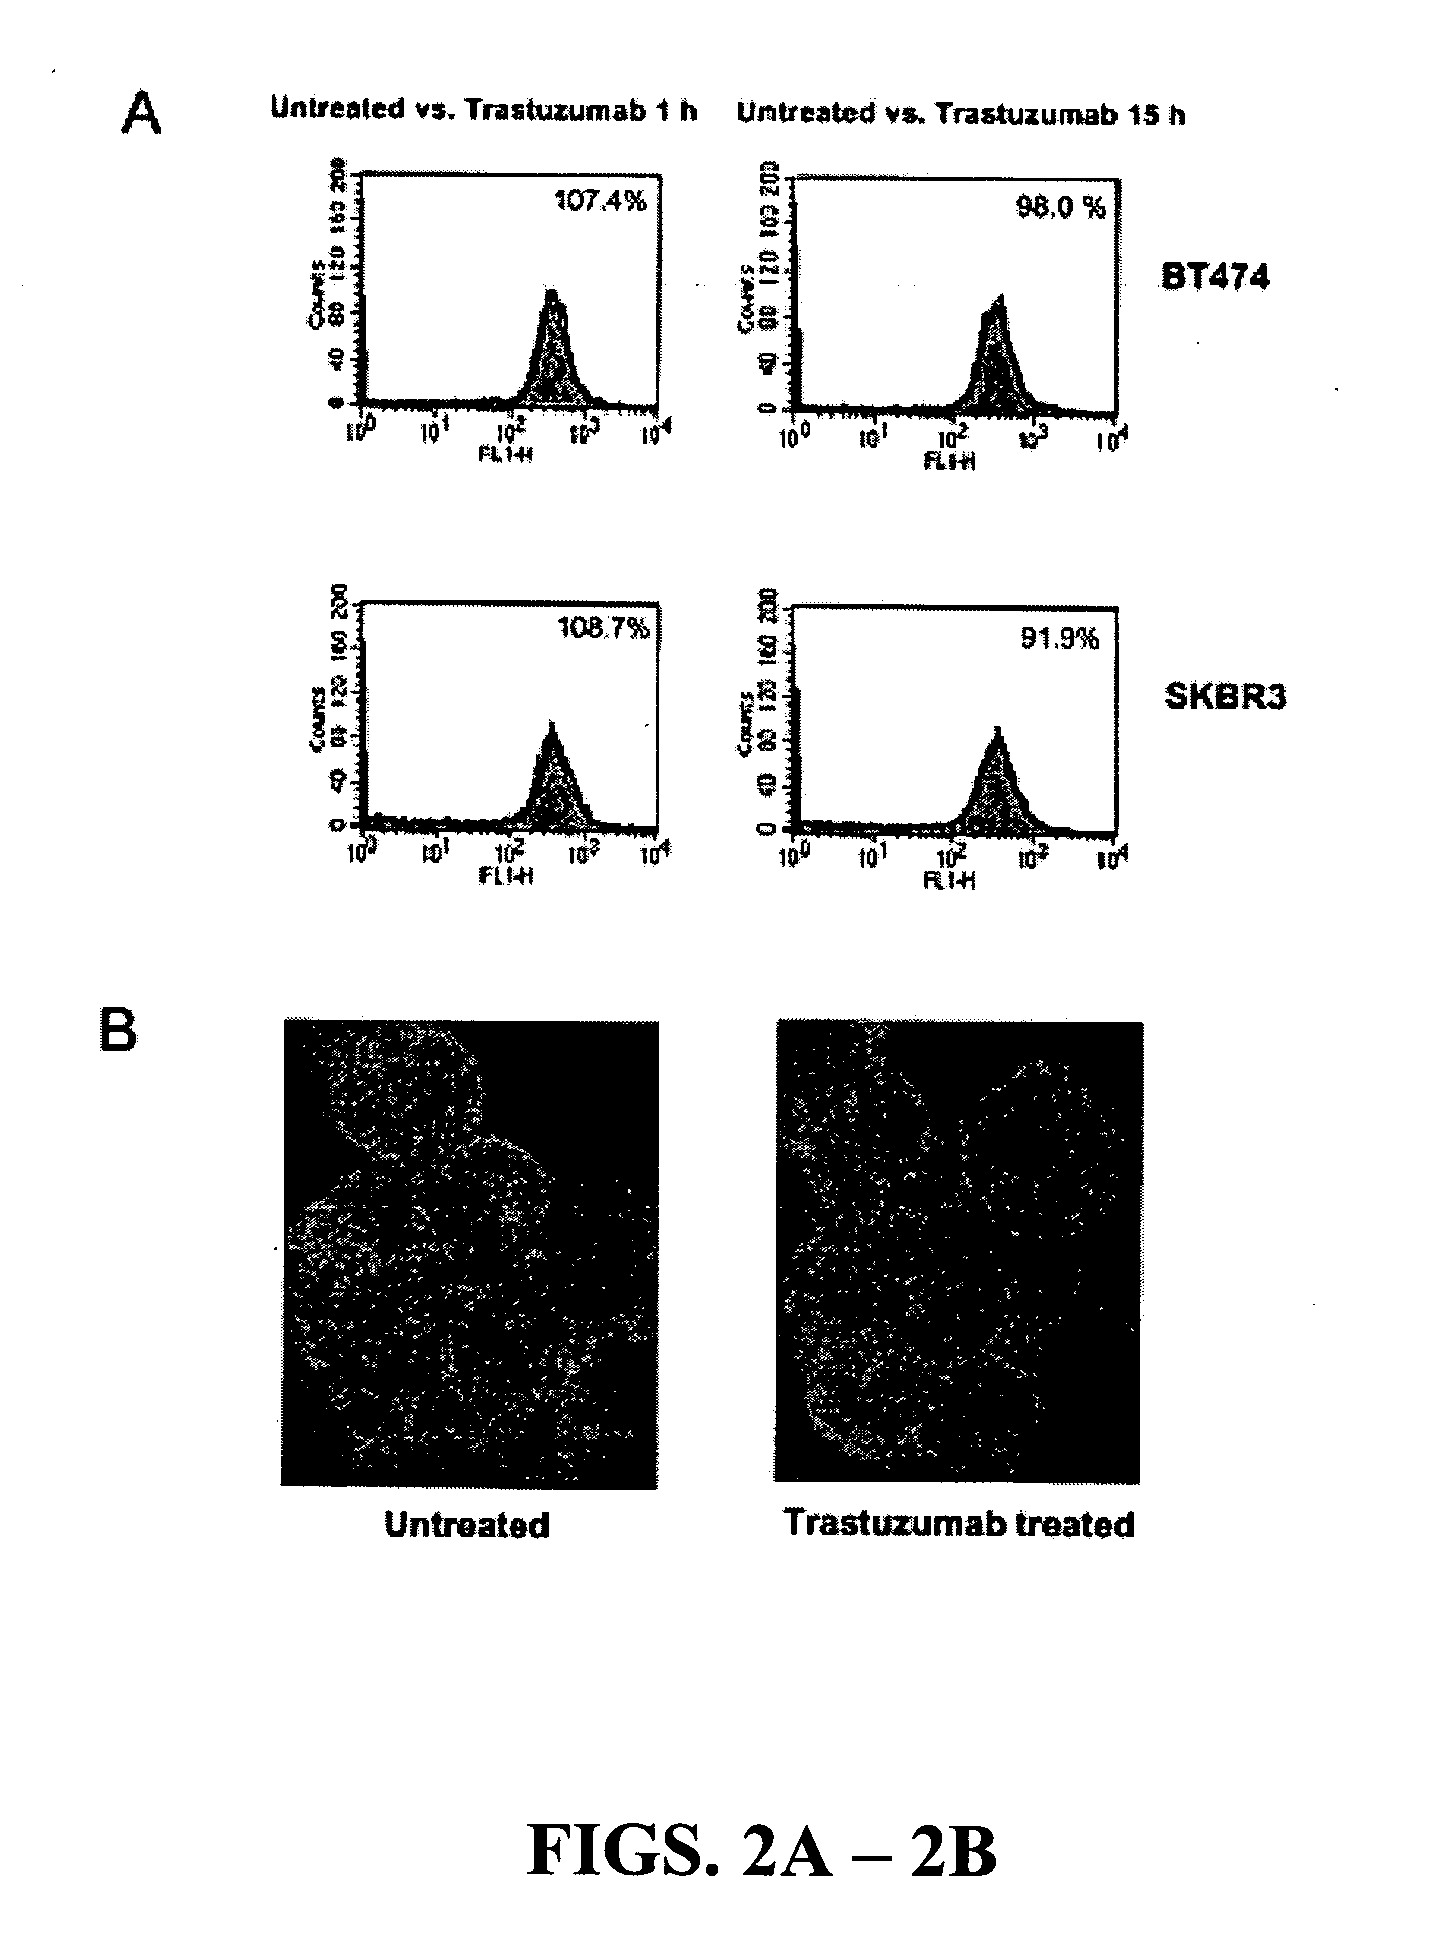 Diagnostic and therapeutic methods and compositions involving PTEN and breast cancer